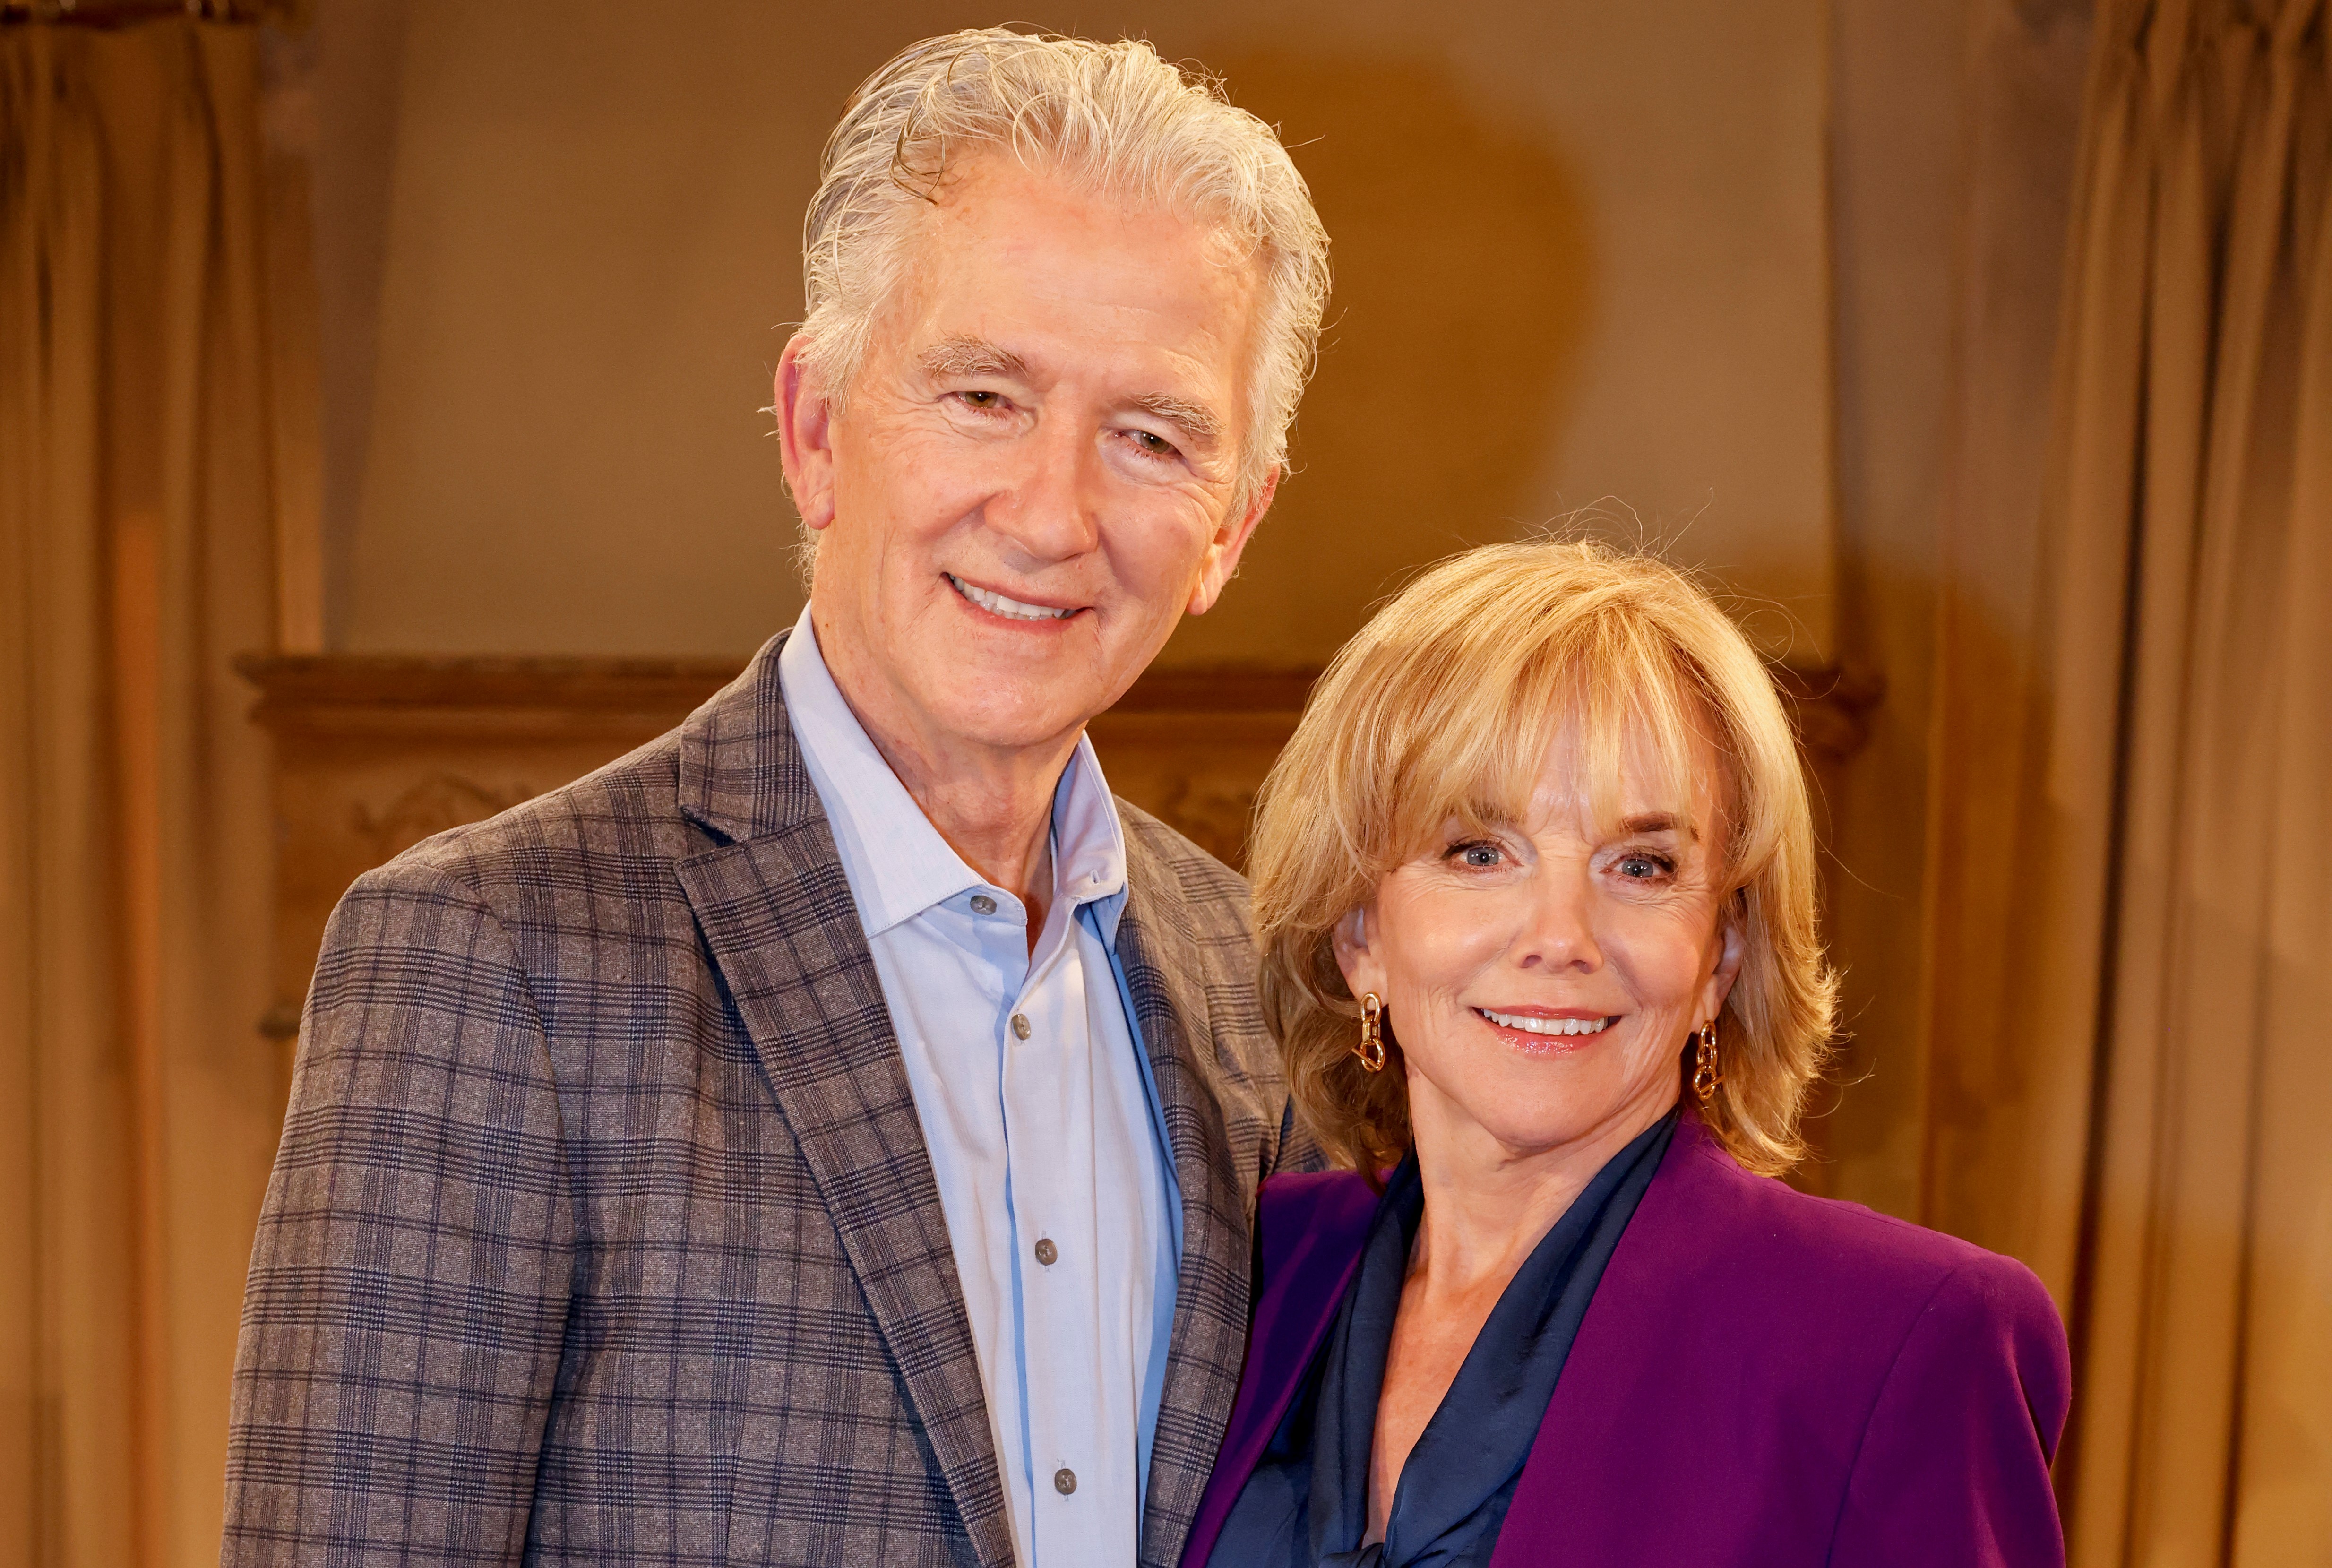 Patrick Duffy and Linda Purl on October 24, 2022. | Source: Getty Images